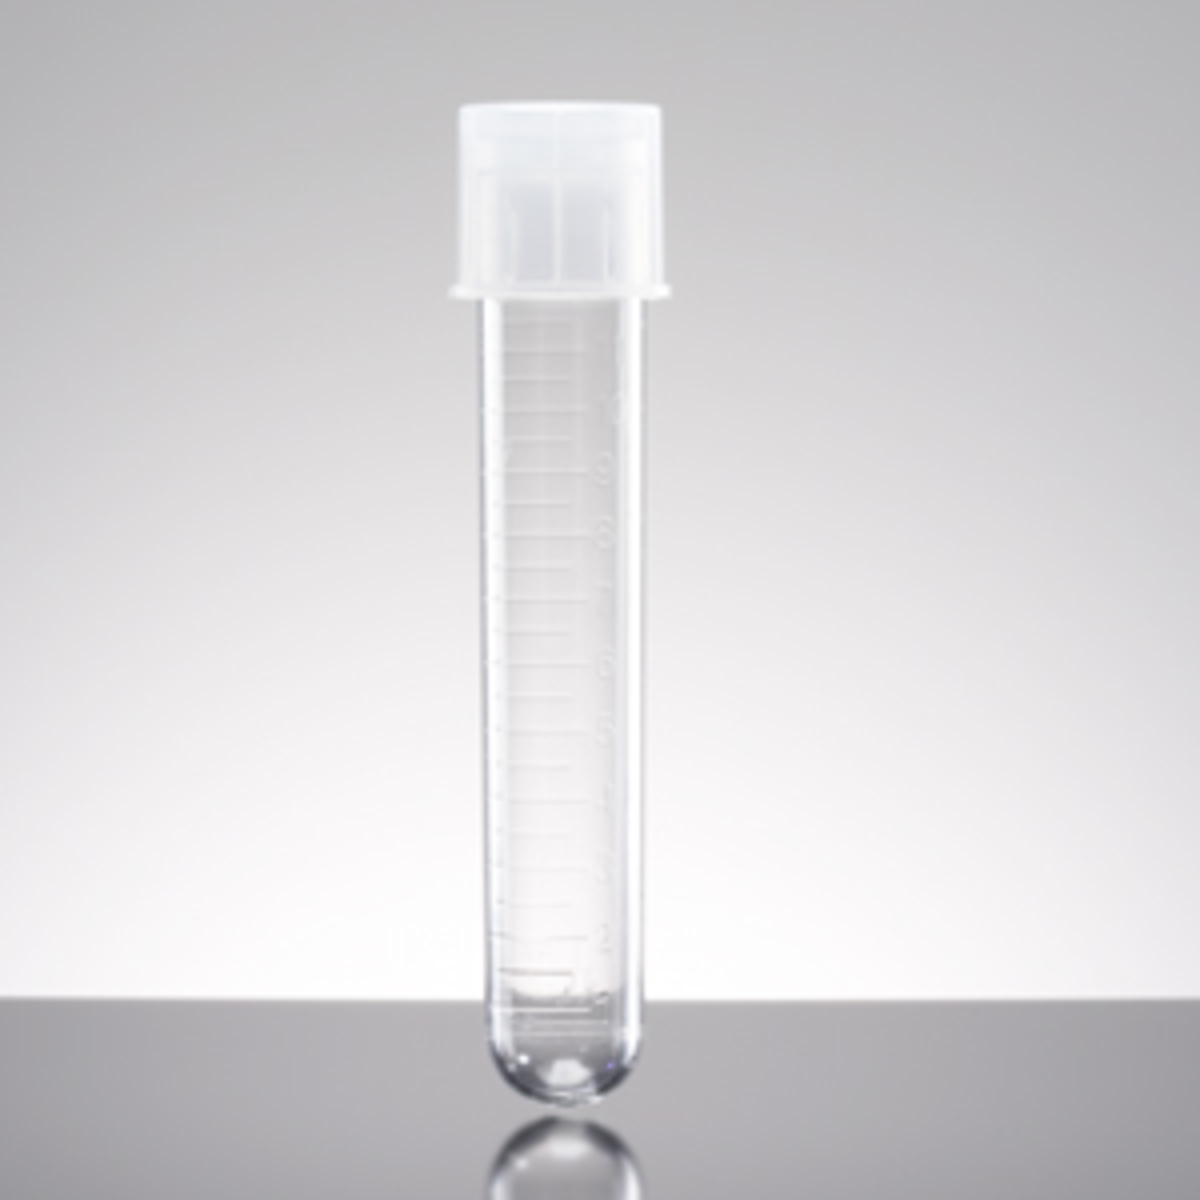 Falcon® 5 mL Round Bottom Polystyrene Test Tube, with Snap Cap, Sterile, Individually Wrapped, 500/Case